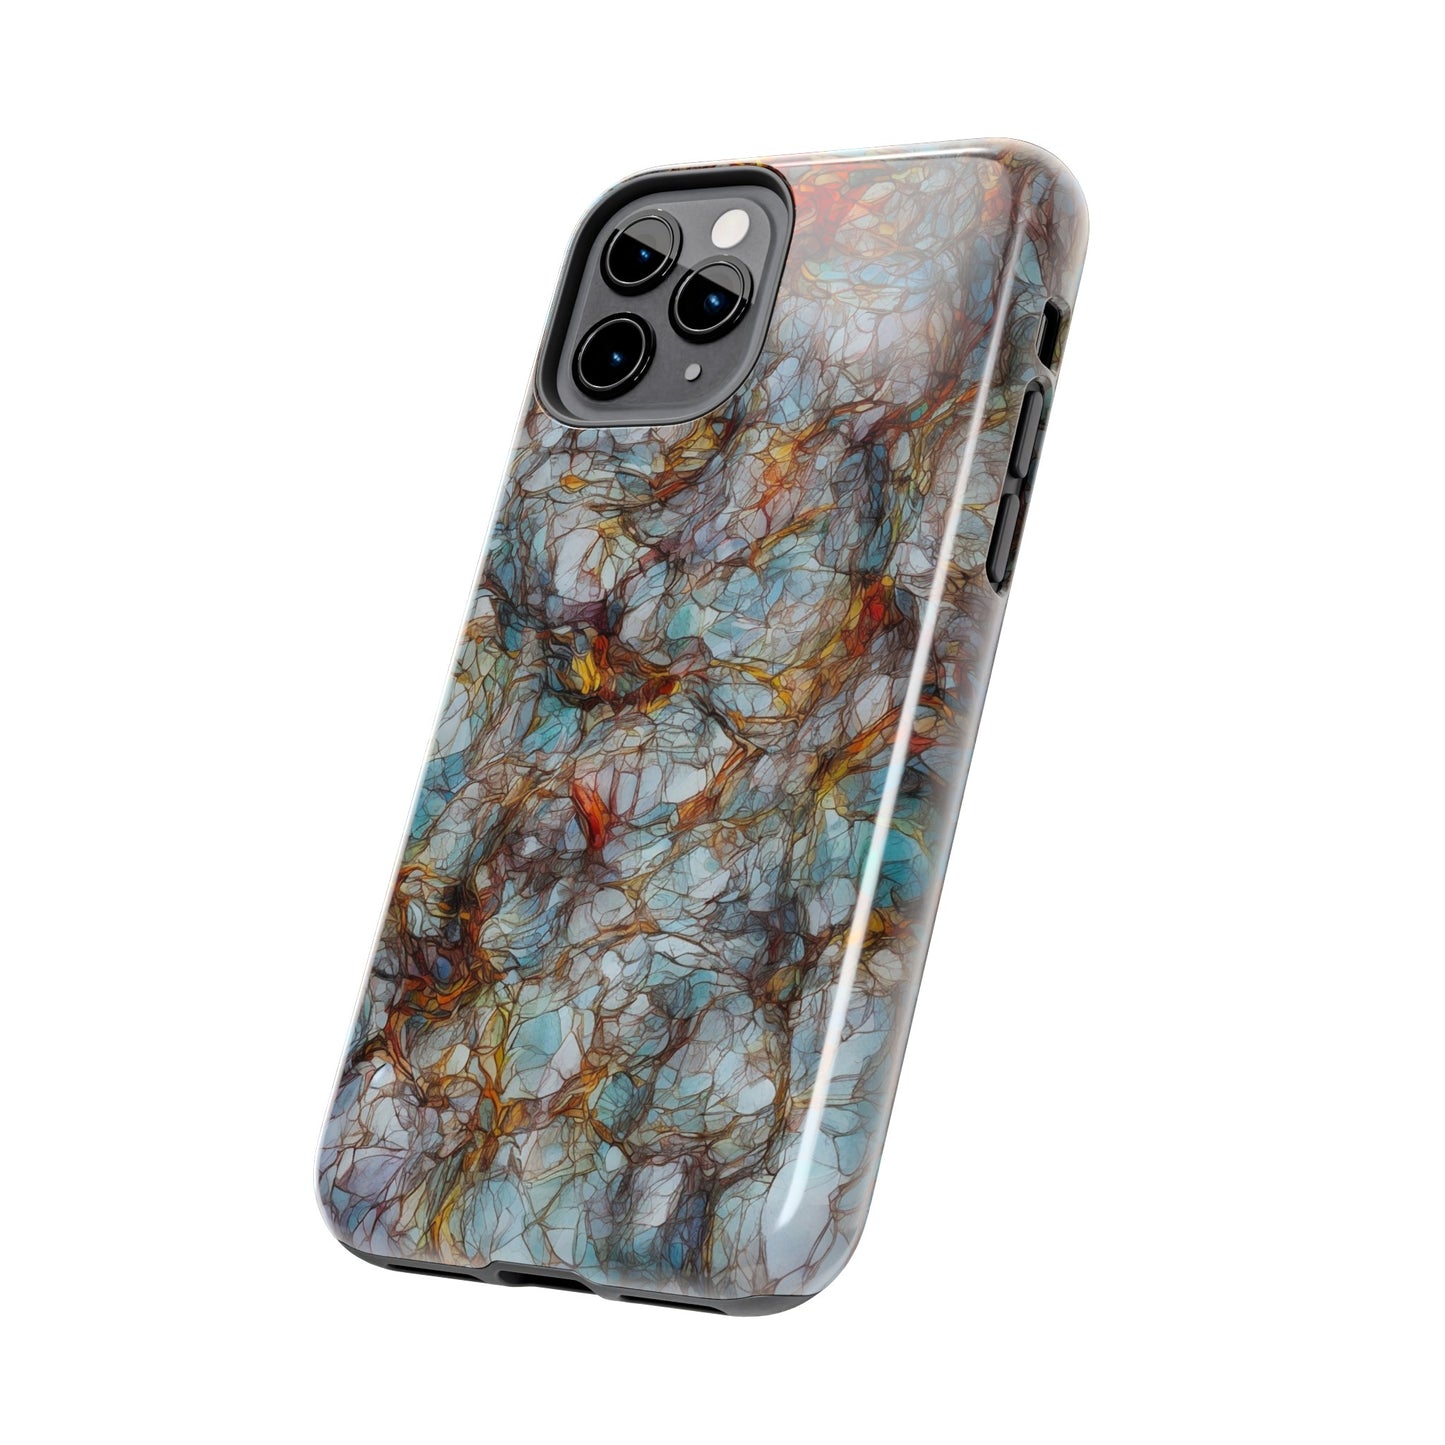 "Ethereal Connections" Tough Phone Cases